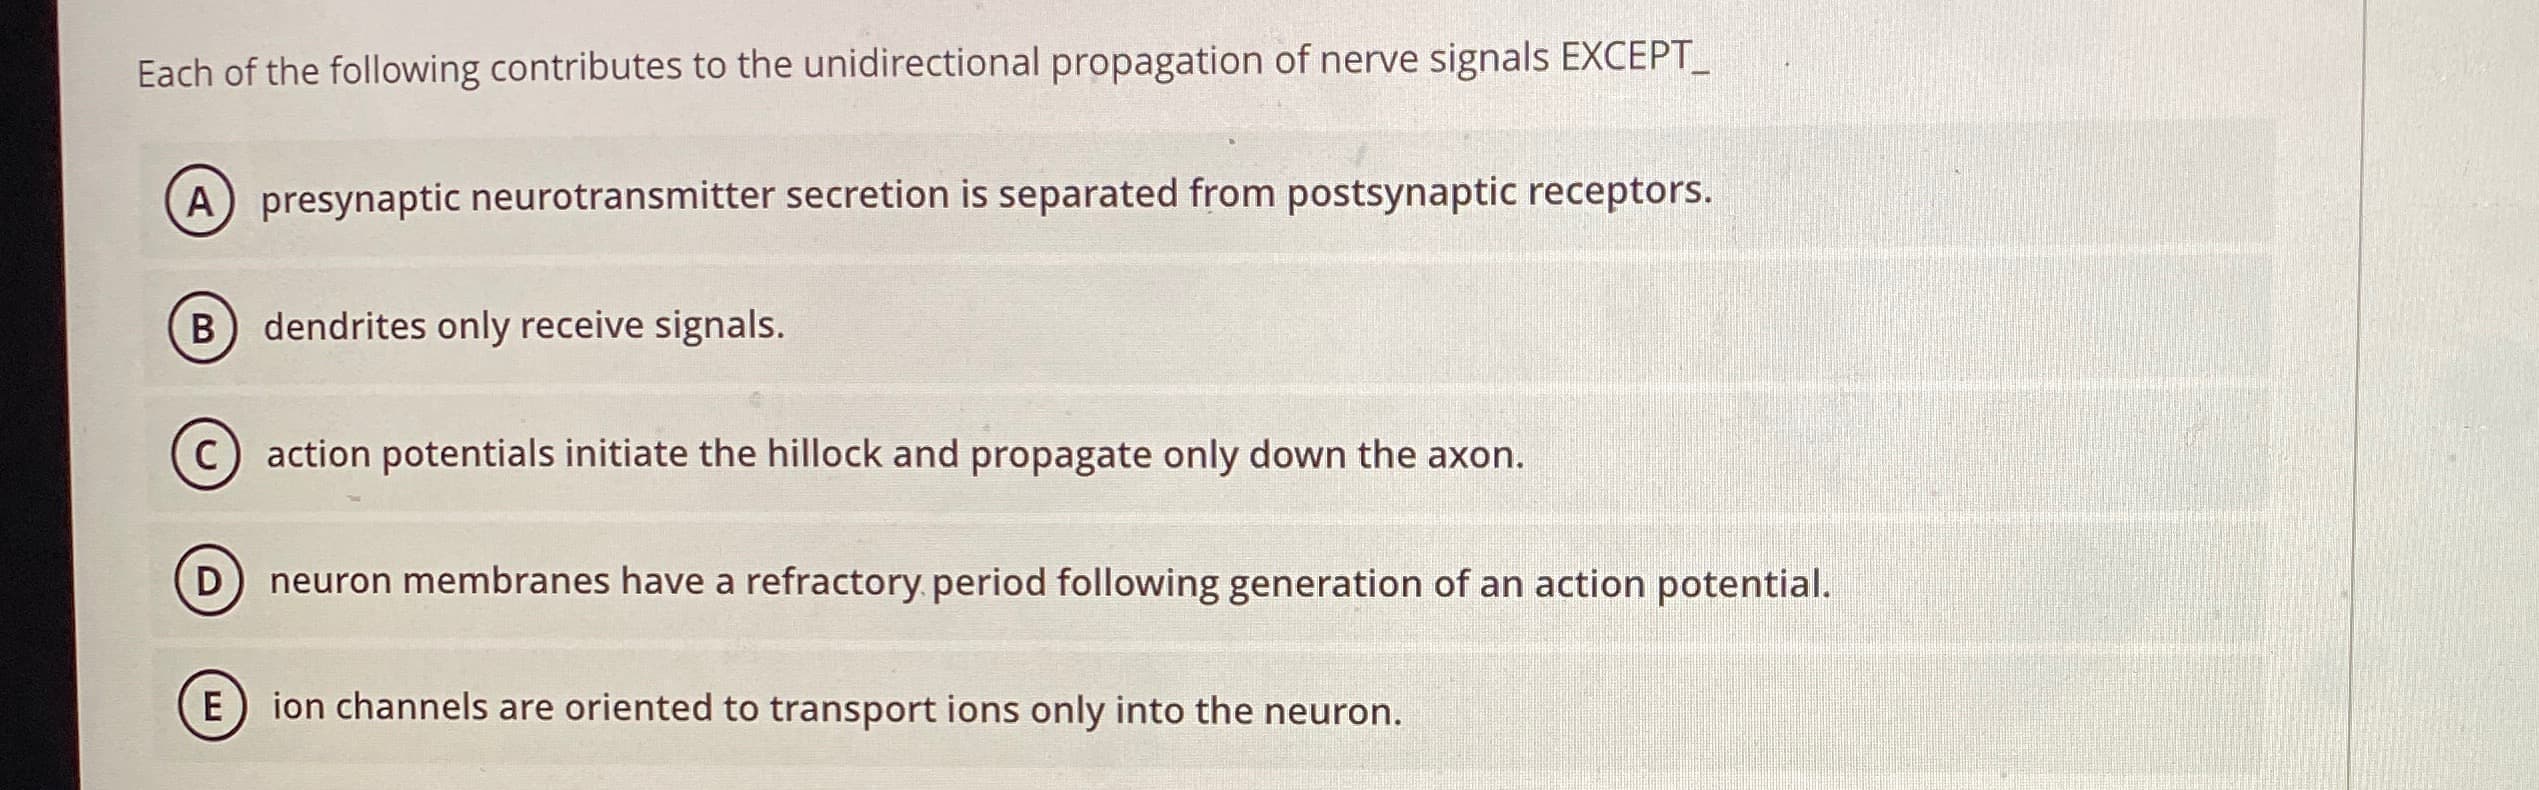 Each of the following contributes to the unidirectional propagation of nerve signals EXCEPT_
A) presynaptic neurotransmitter secretion is separated from postsynaptic receptors.
dendrites only receive signals.
action potentials initiate the hillock and propagate only down the axon.
D
neuron membranes have a refractory period following generation of an action potential.
E
ion channels are oriented to transport ions only into the neuron.
